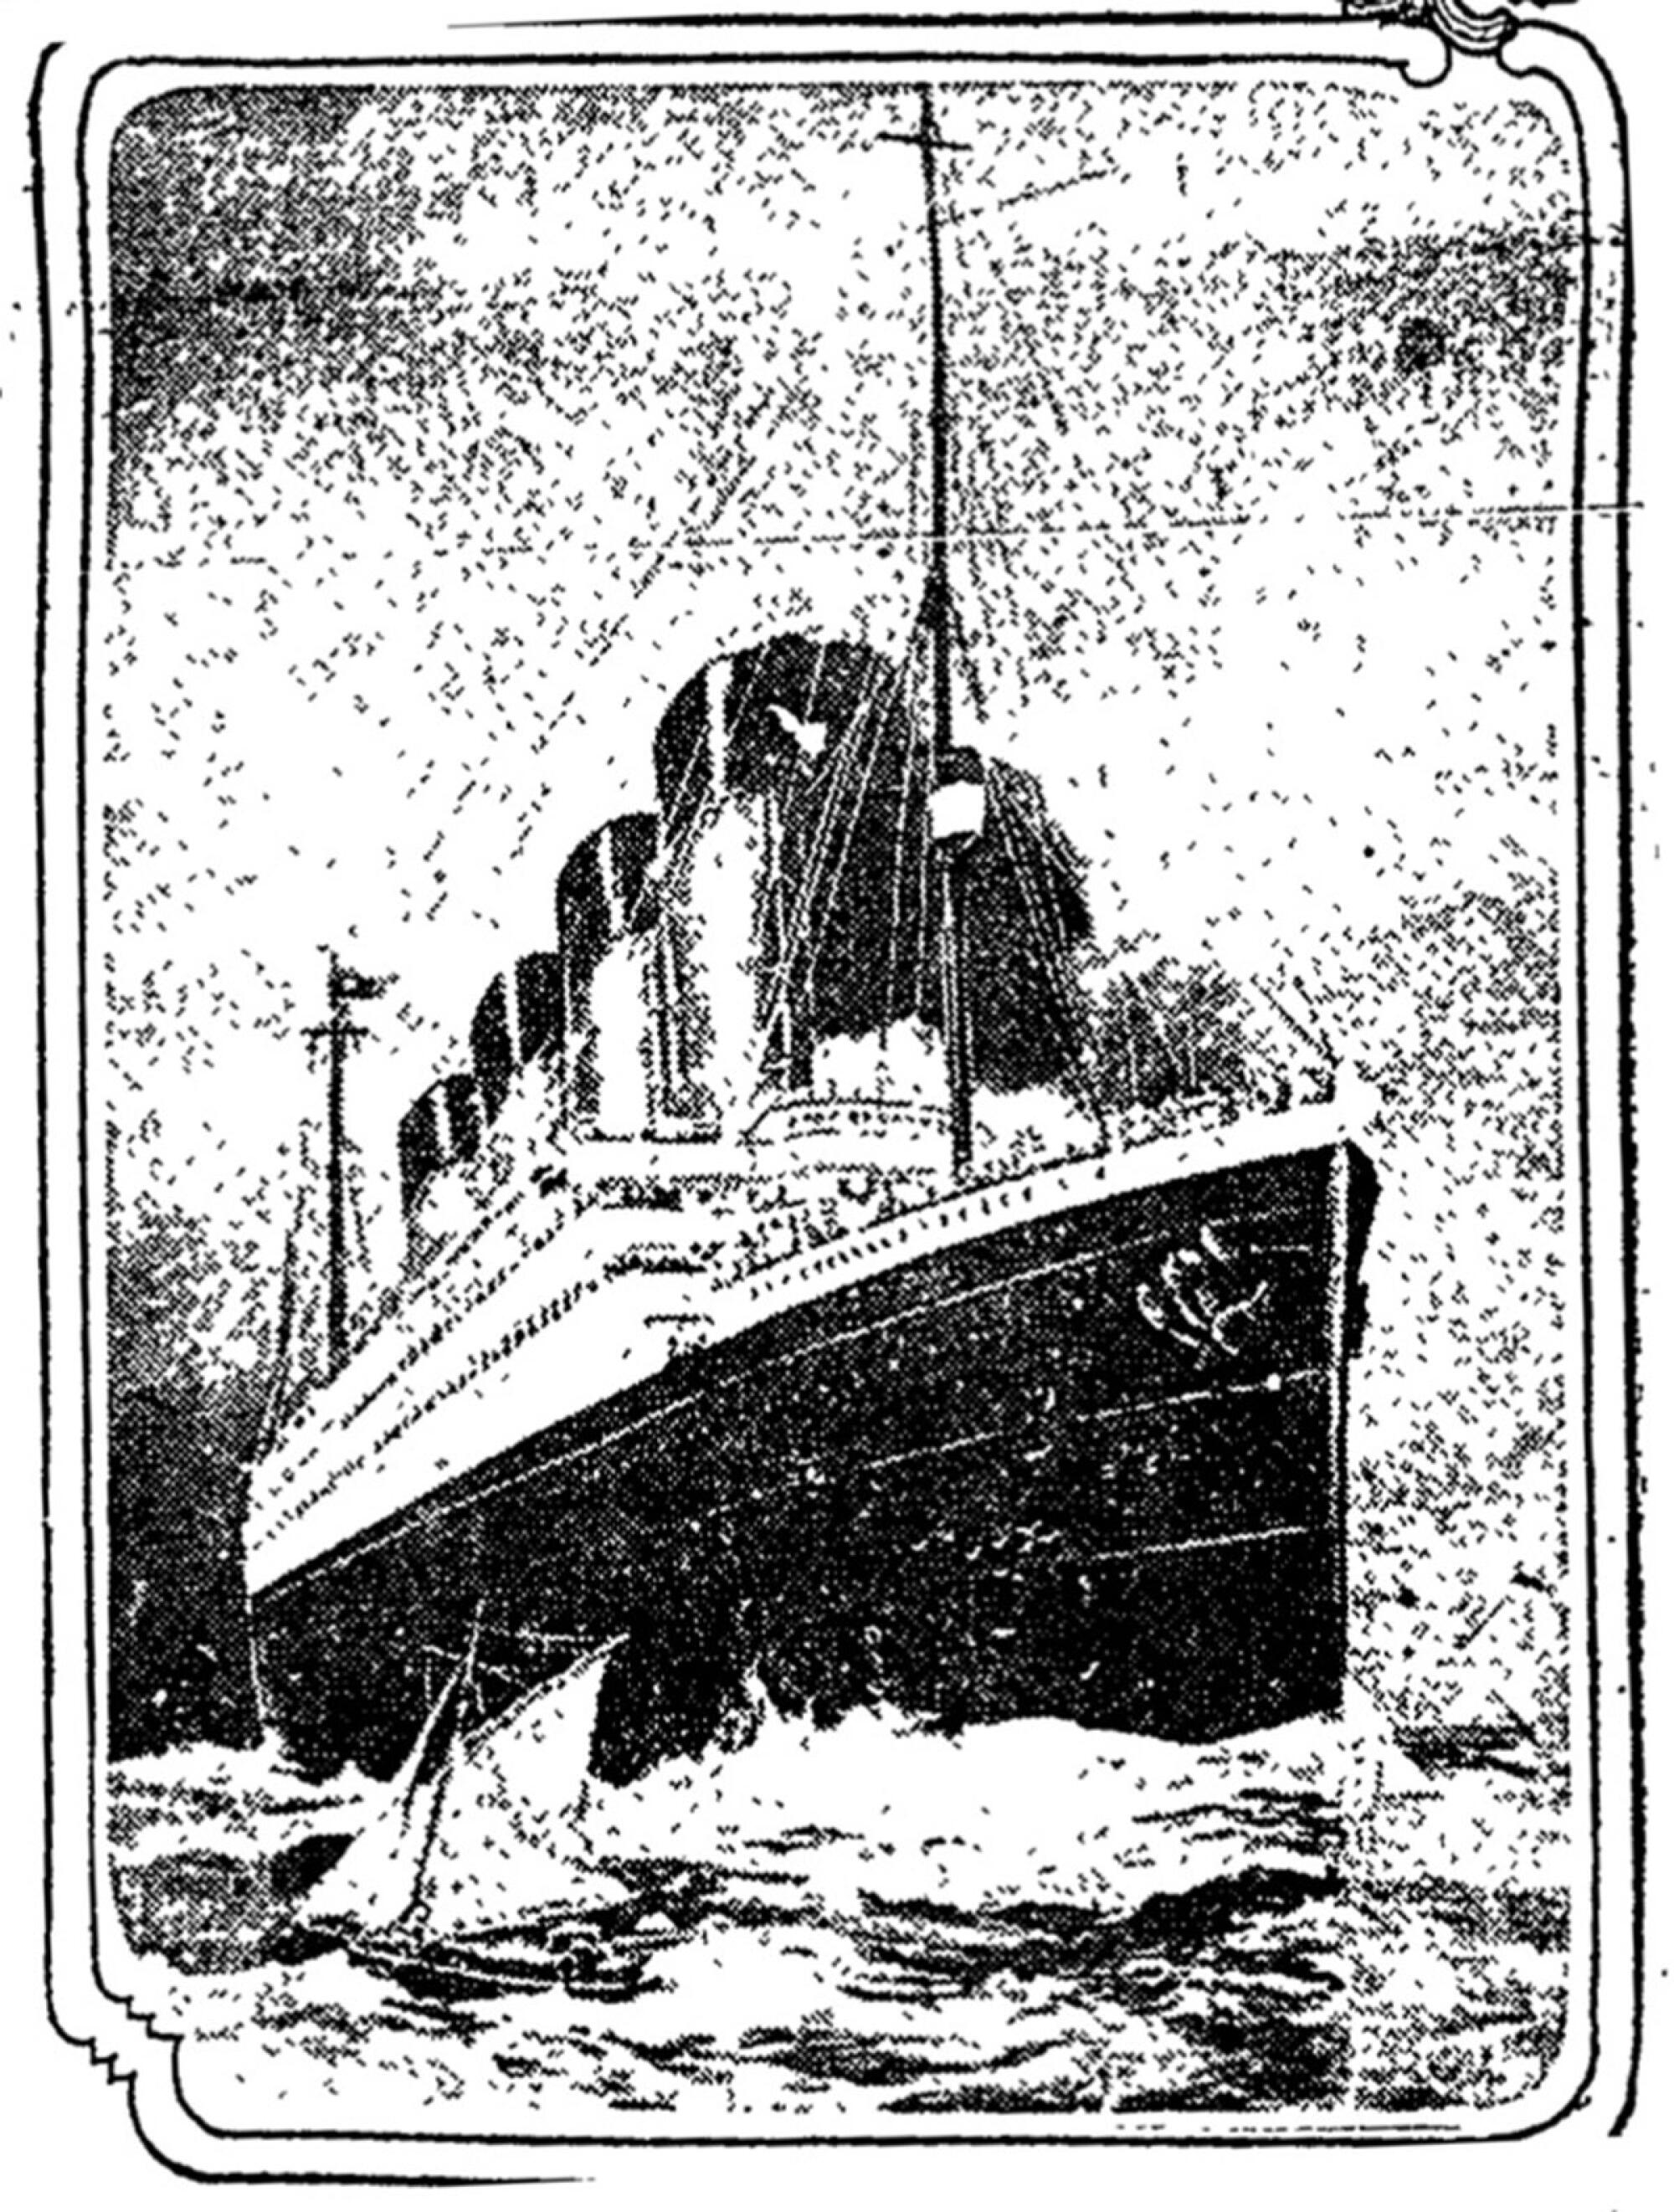 A line drawing of the RMS Titanic. 